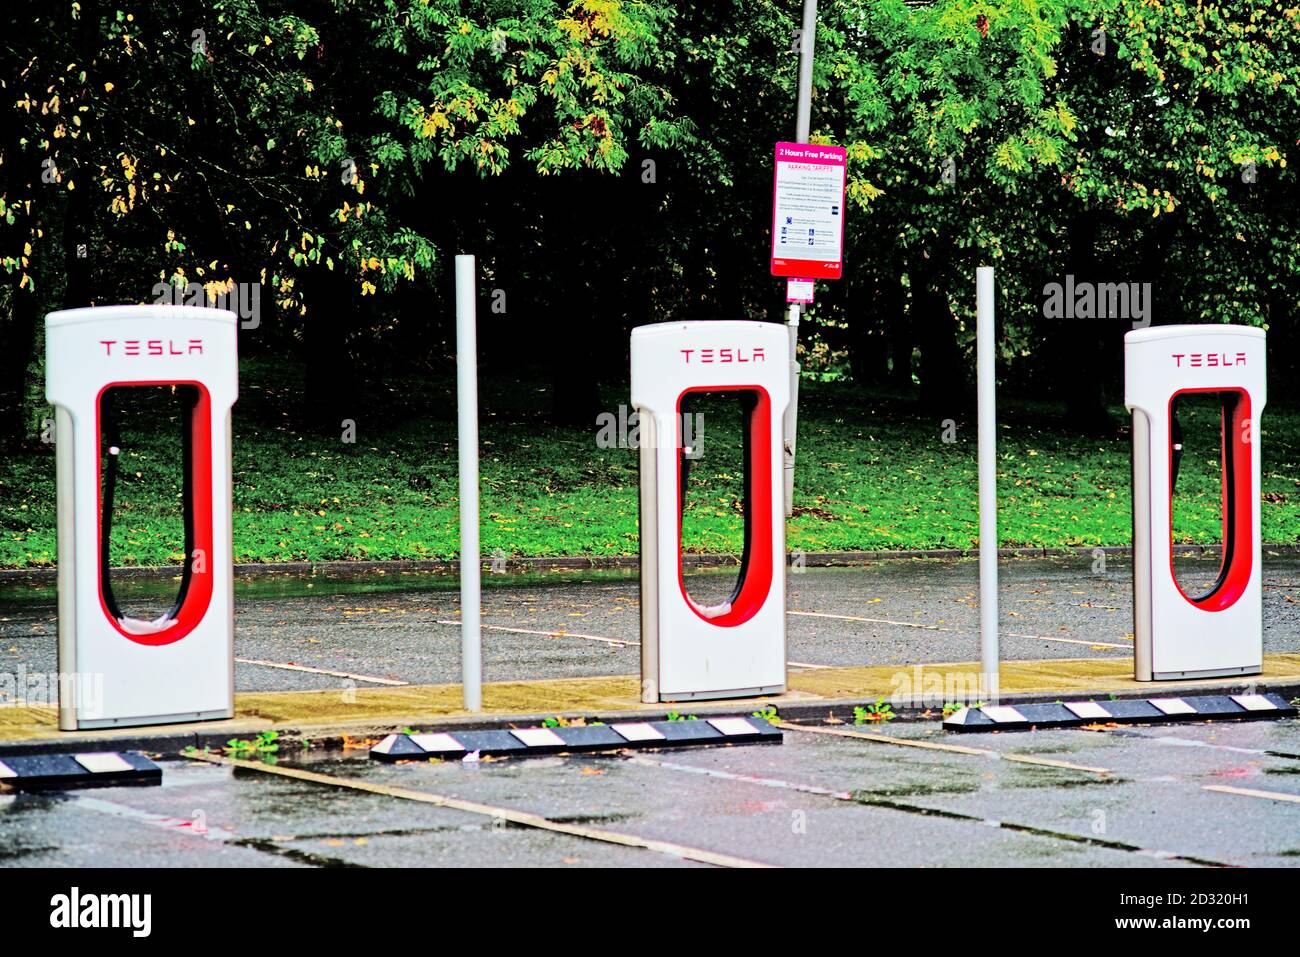 Tesla Electric Car Charging Points Stock Photo